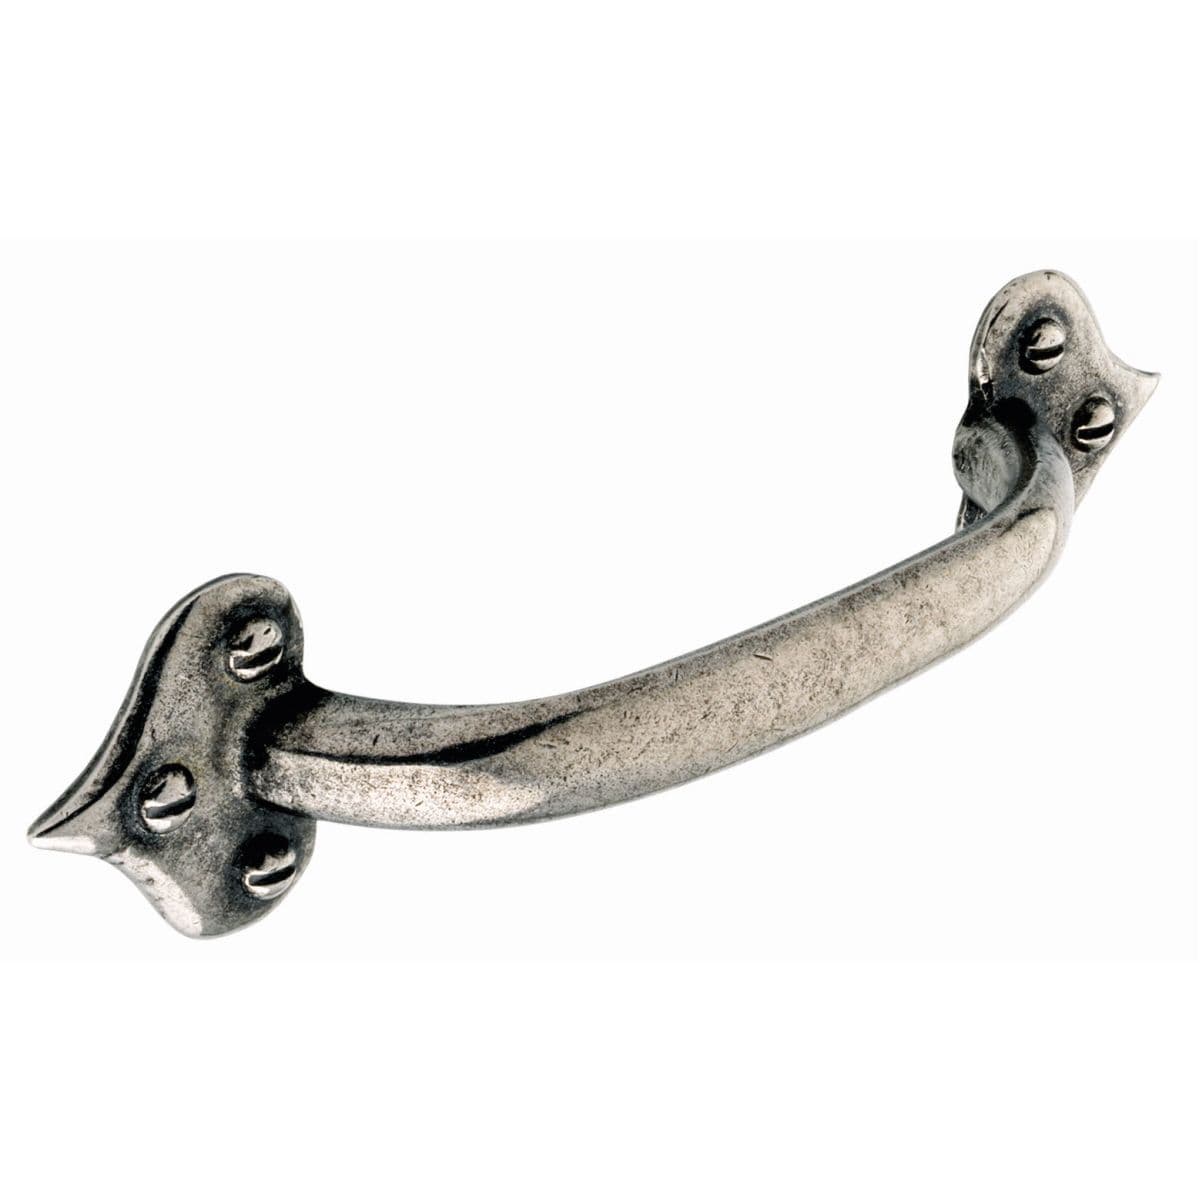 HUNCOTE FAUX SCREW HEART D Cupboard Handle - 96mm h/c size - RAW PEWTER finish (PWS H153.96.PE)